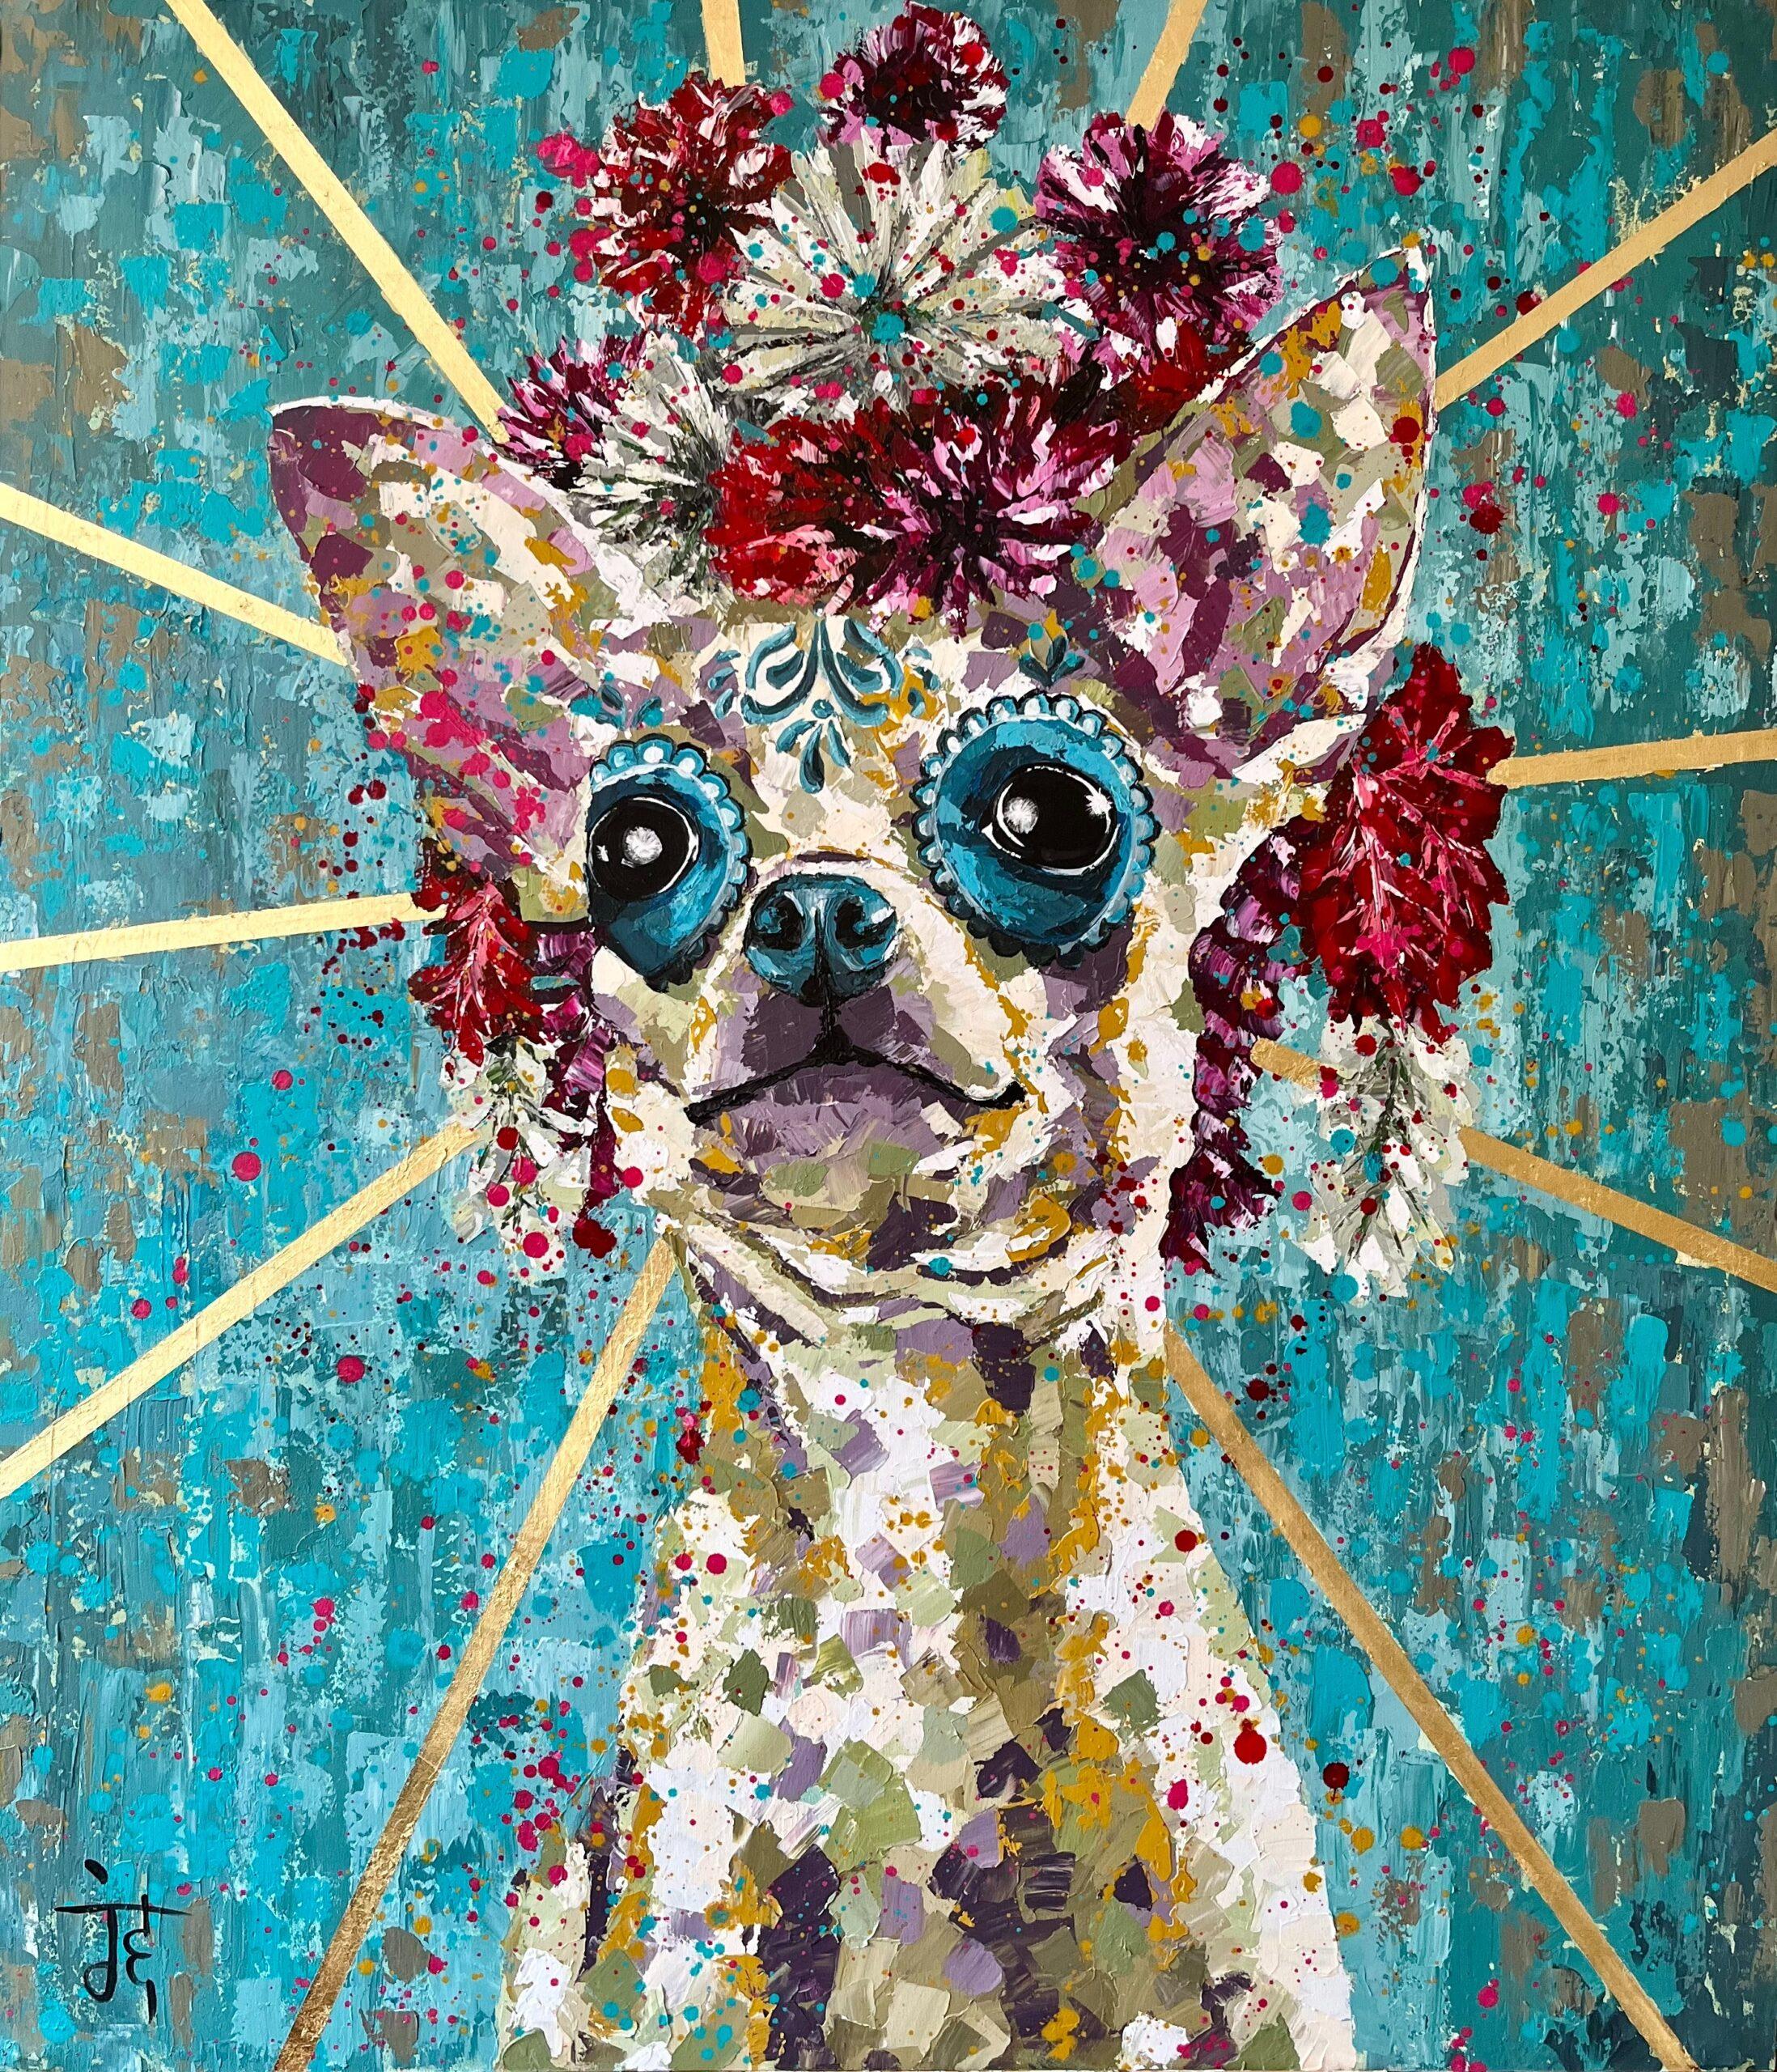 CHIHUAHUA by José Enrique - Painting by Unknown